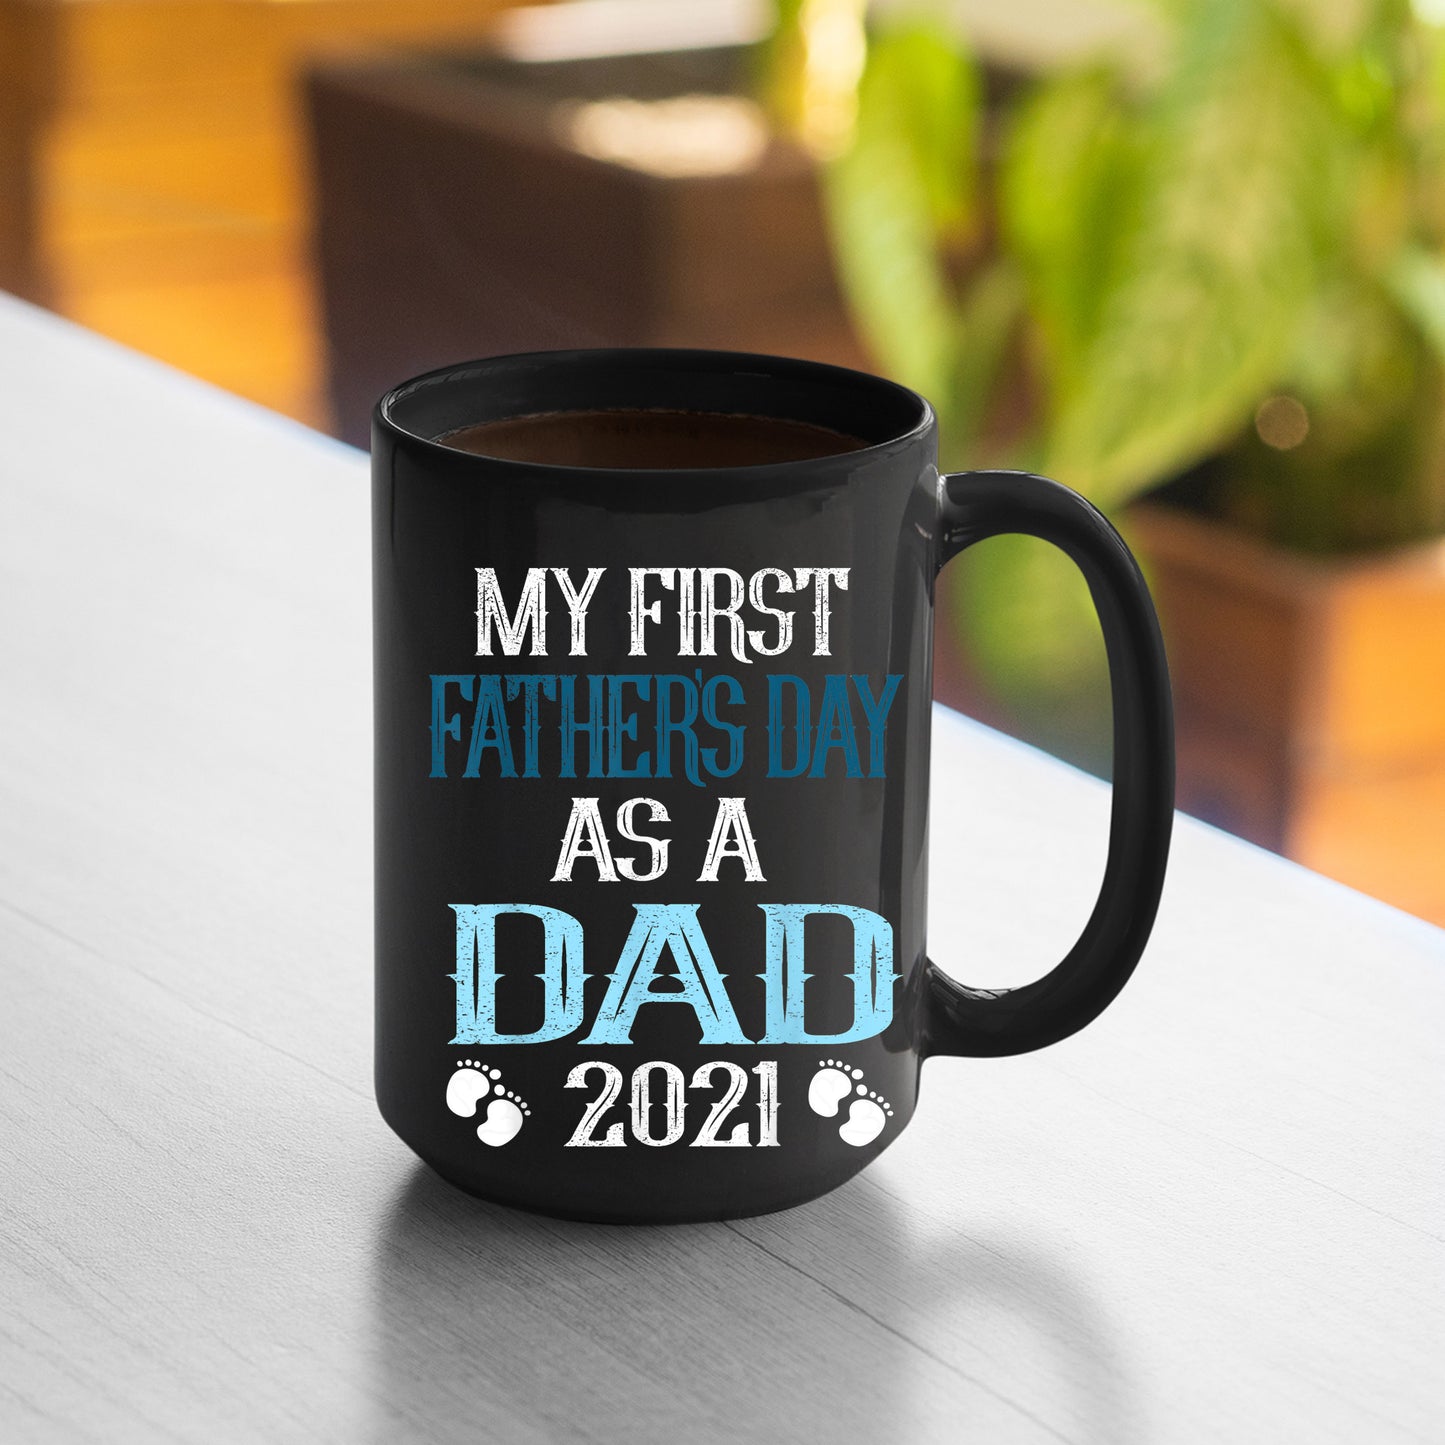 First Fathers Day Mug Mens Mens Fathers Day Design My First Fathers Day As A Dad 2021 Mug , 11oz or 15oz, Happy Fathers Day Gift Ideas For Dad